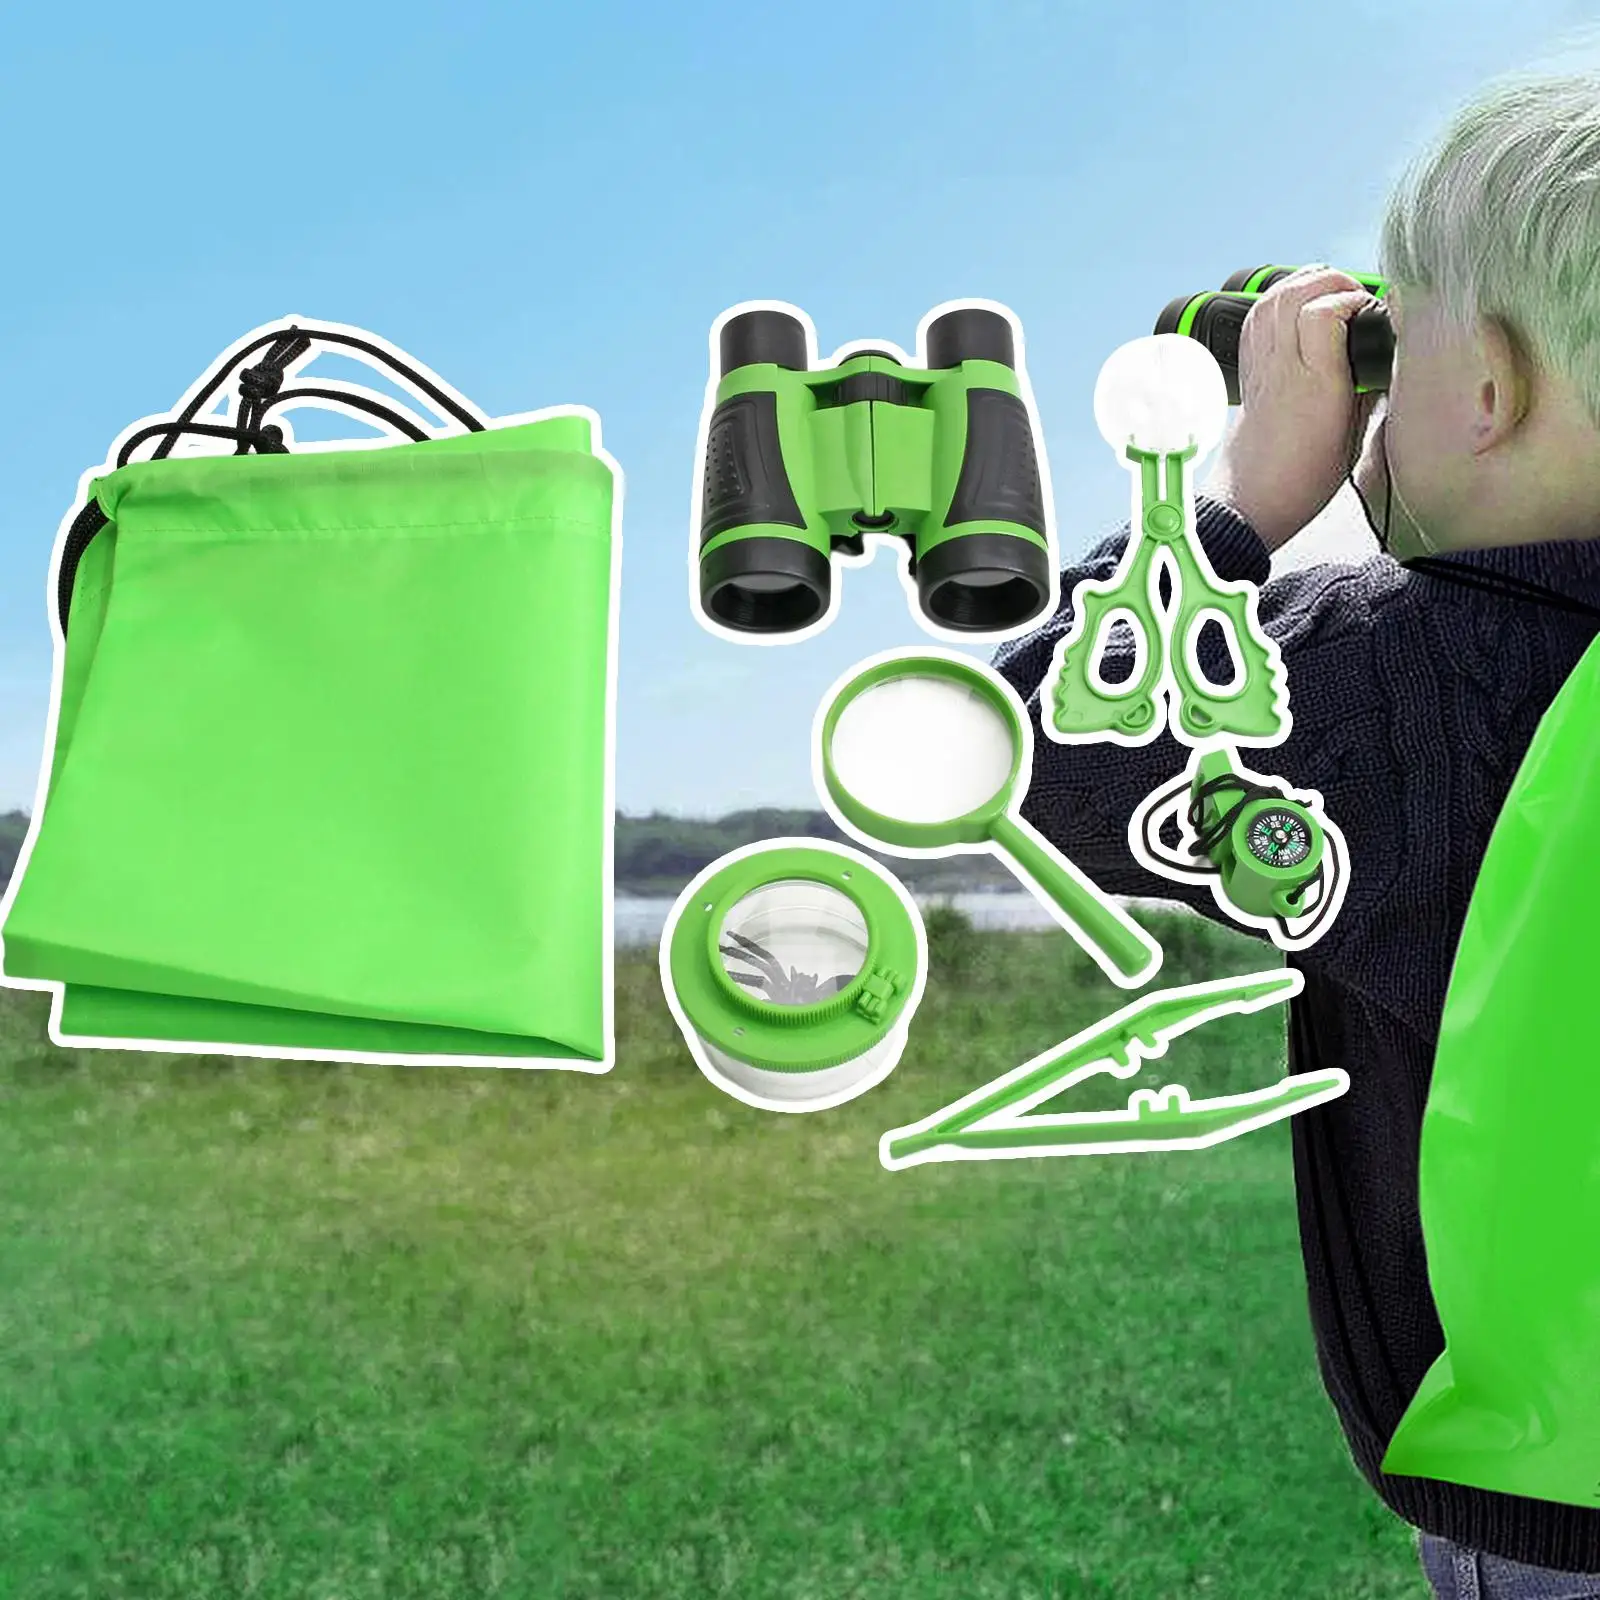 7 Pieces Nature Exploration Kits Whistle for Exploration Projects Plants Animal Learning Backyard Hiking Outdoor Activities